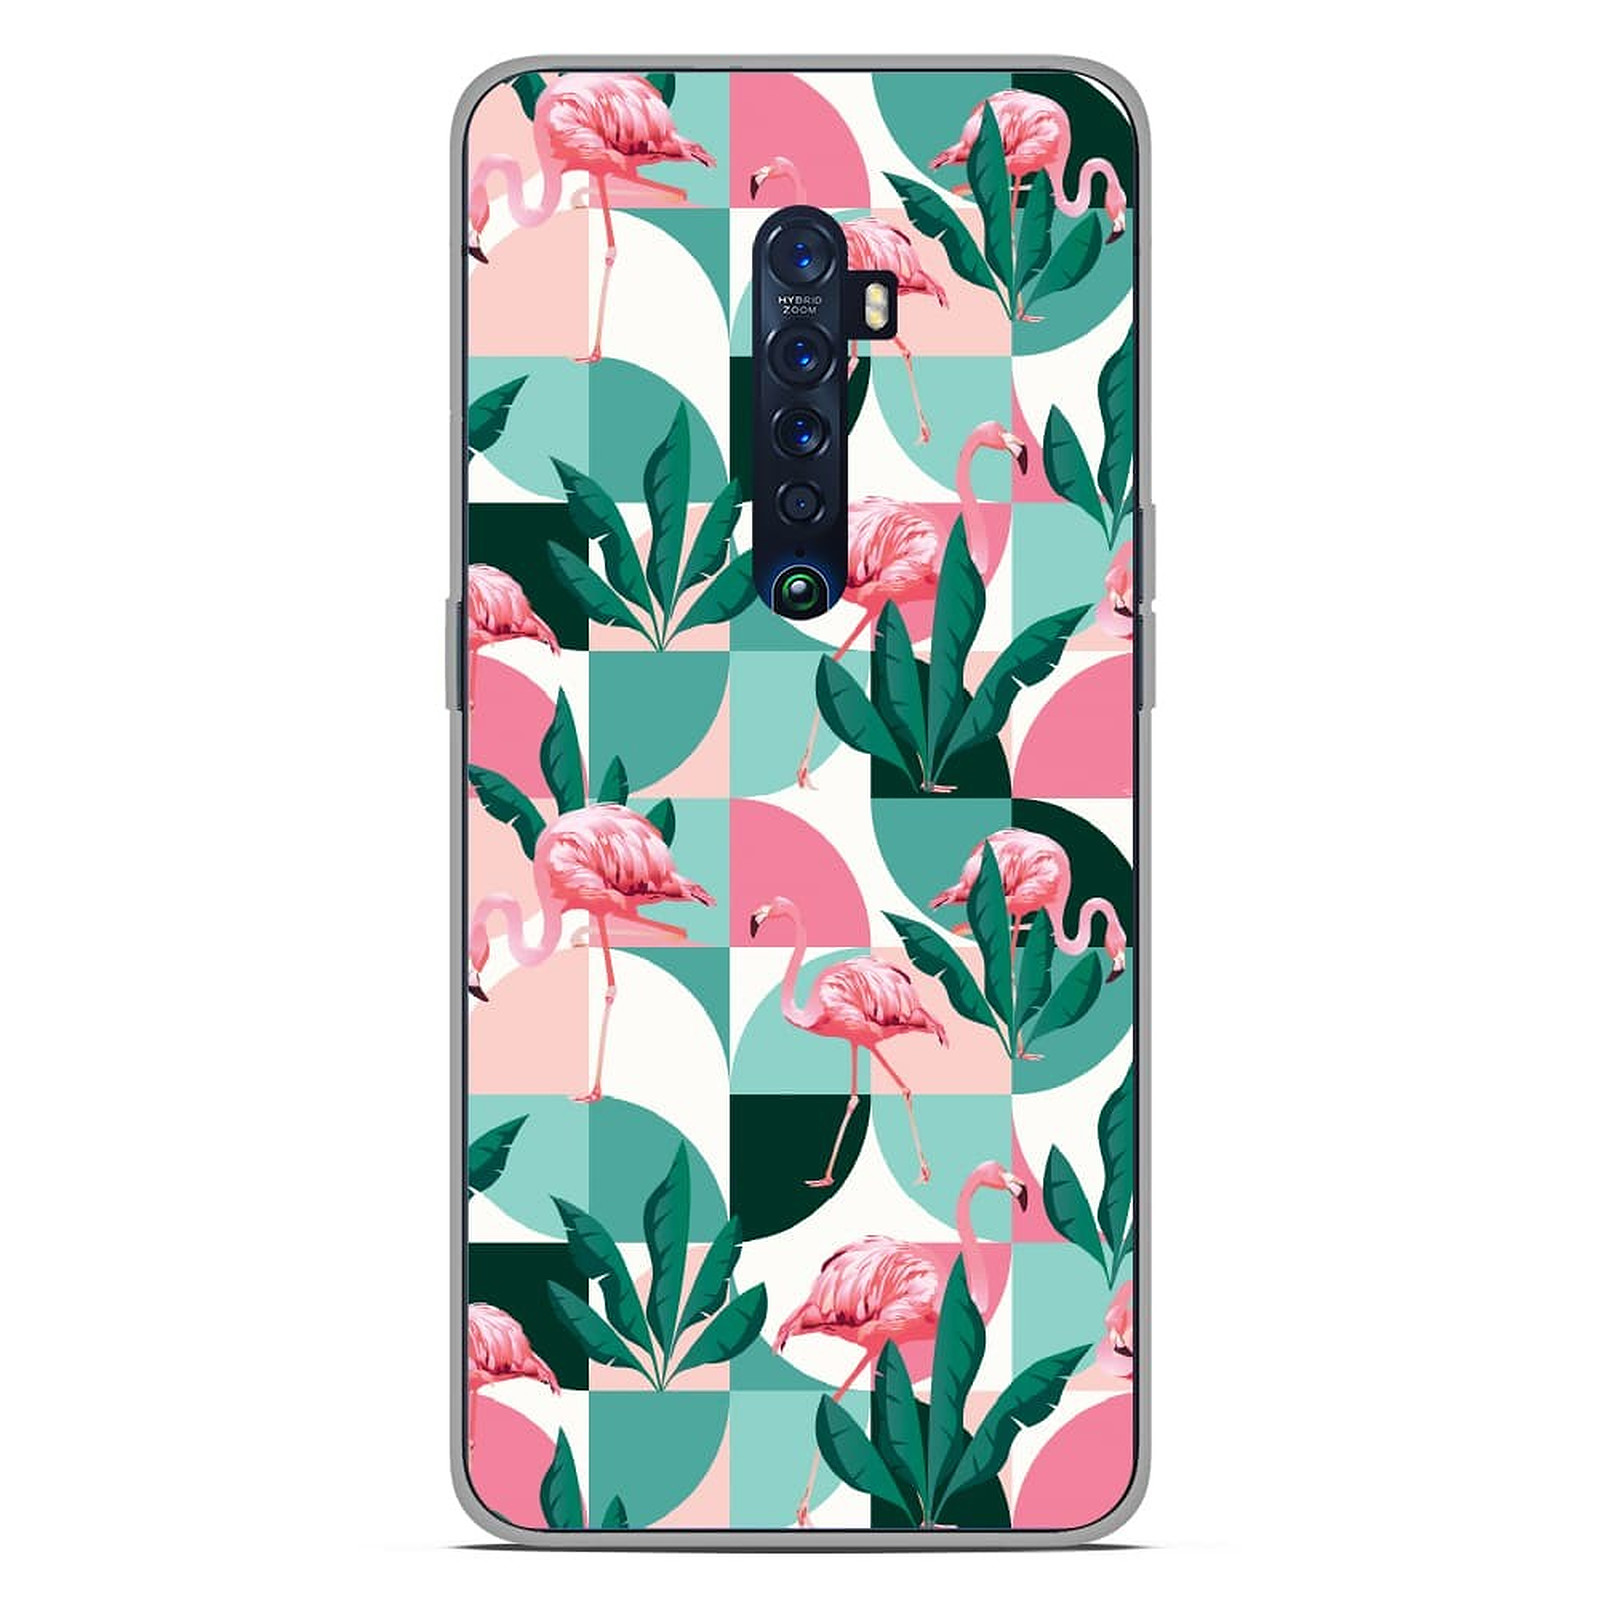 1001 Coques Coque silicone gel Oppo Reno 2 motif Flamants Roses ge´ome´trique - Coque telephone 1001Coques